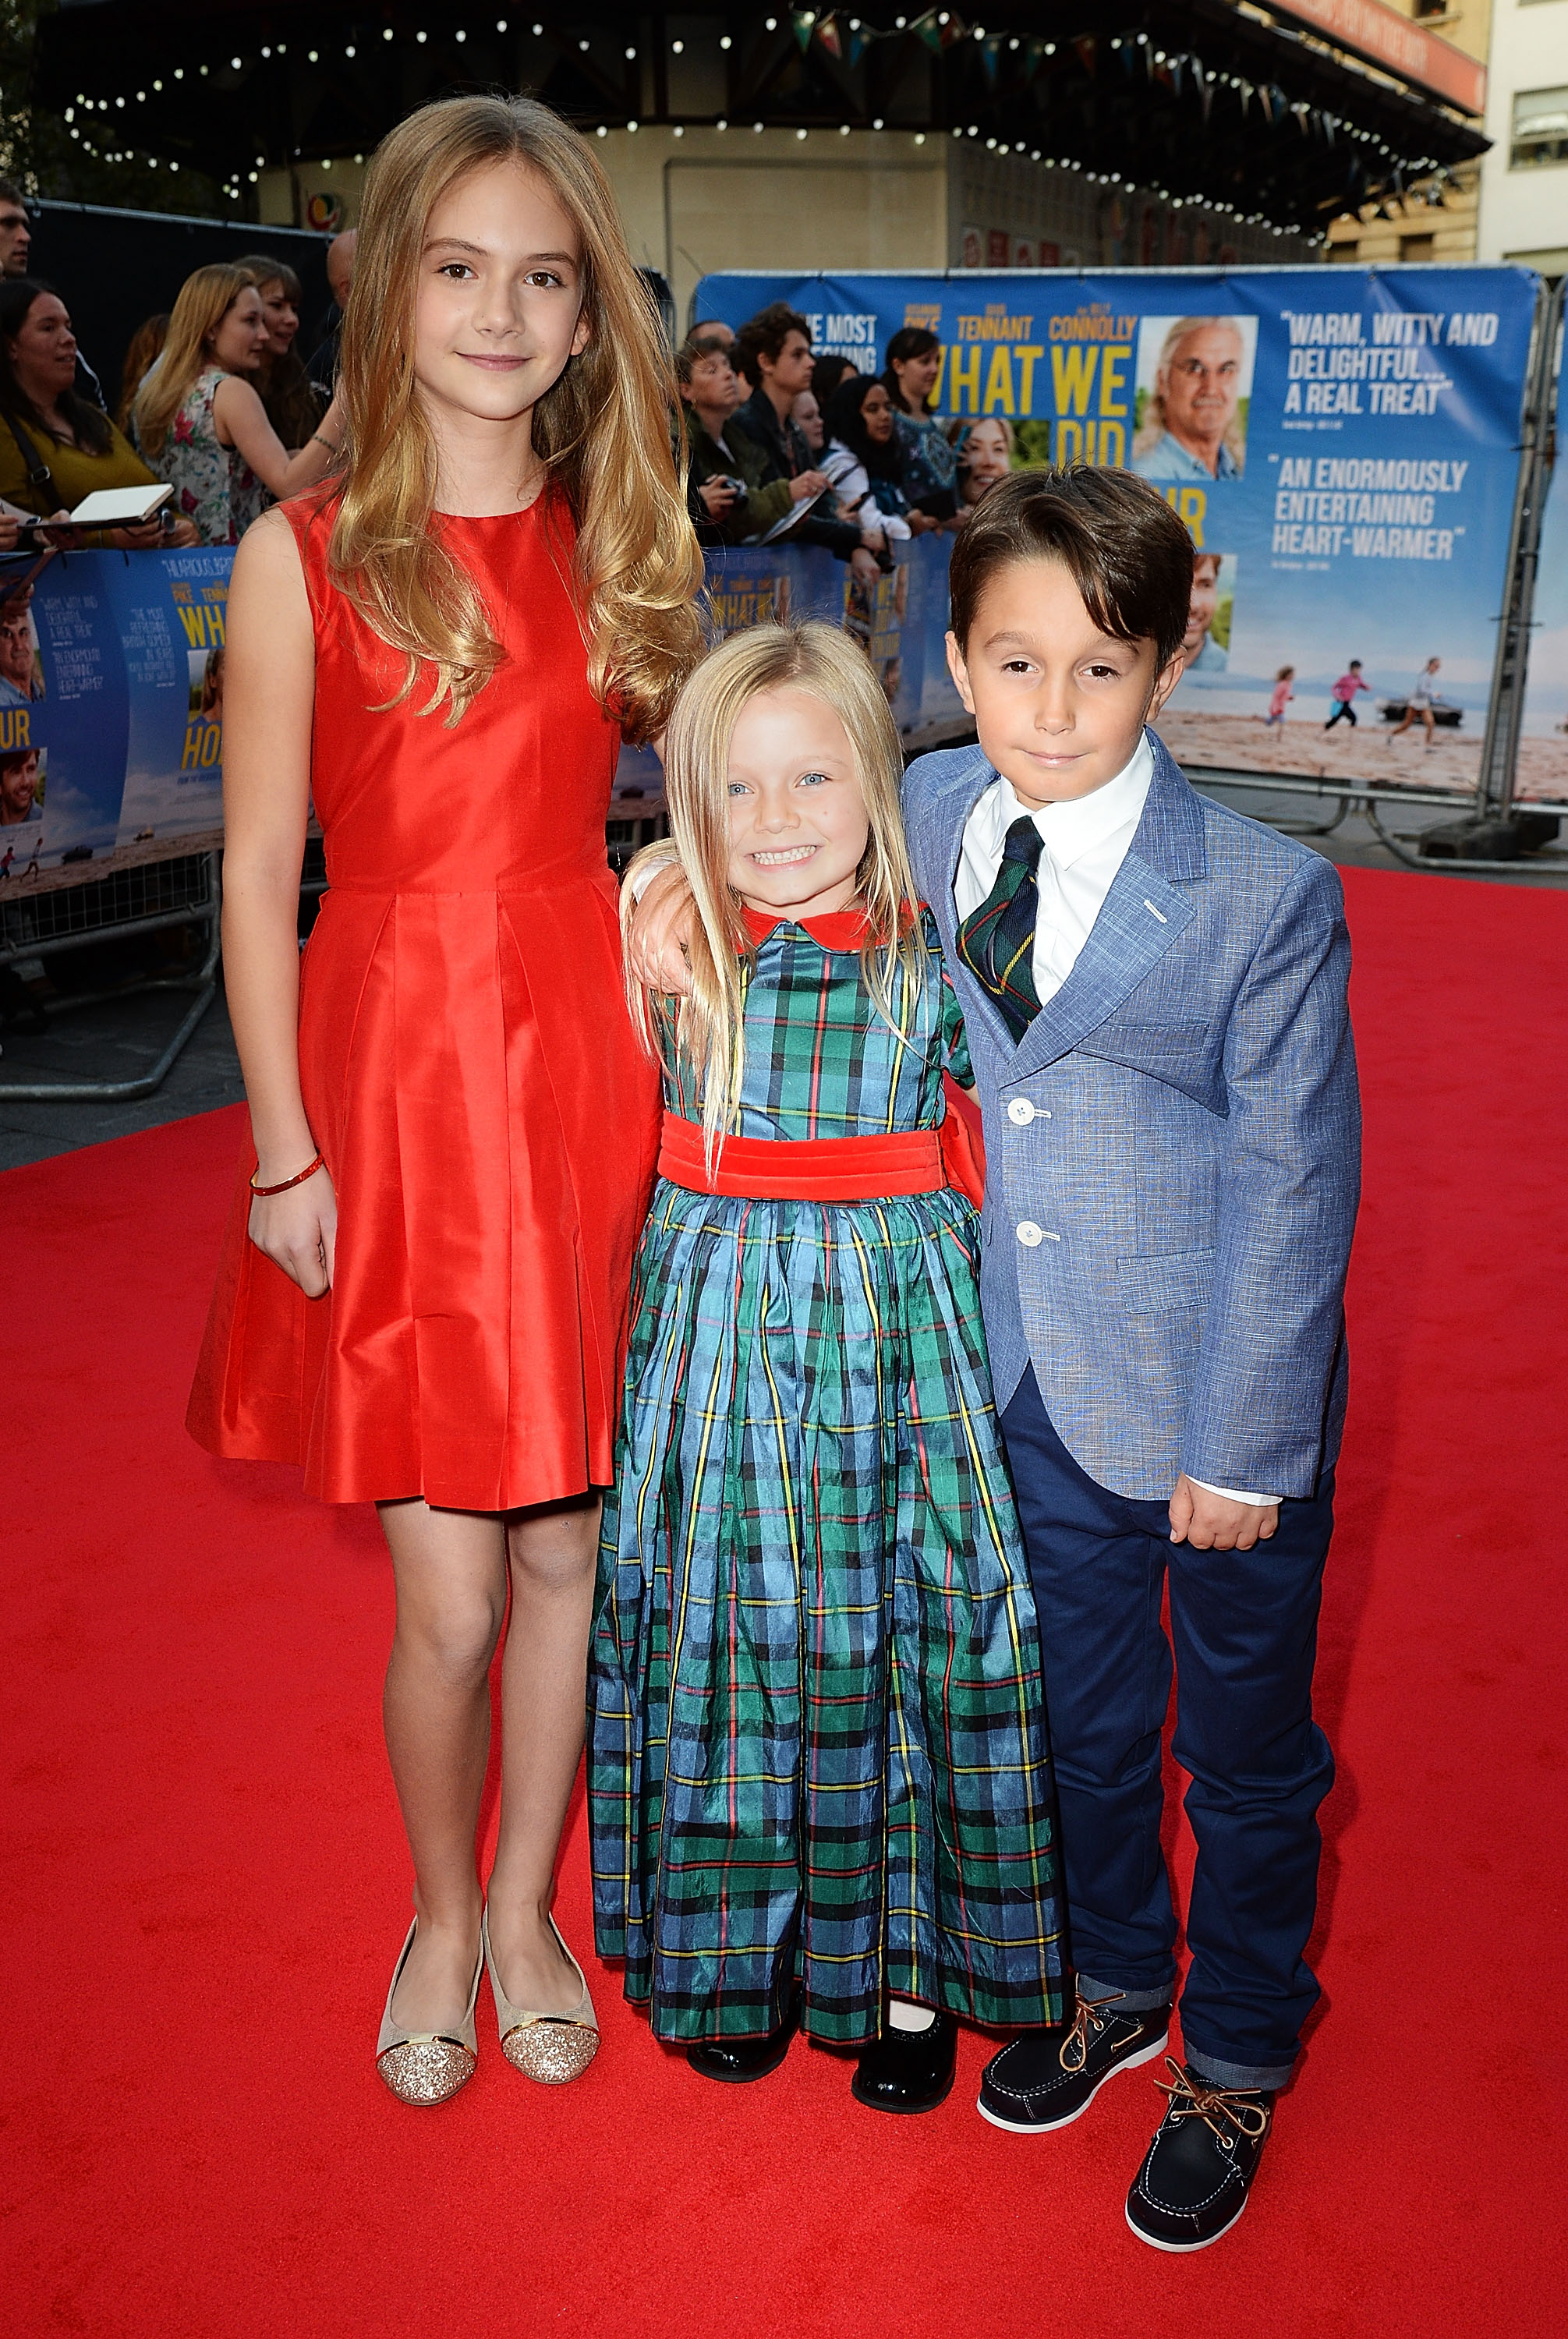 Emilia Jones, Harriet Turnbull & Bobby Smalldridge attend the What We Did On Our Holiday Premiere.